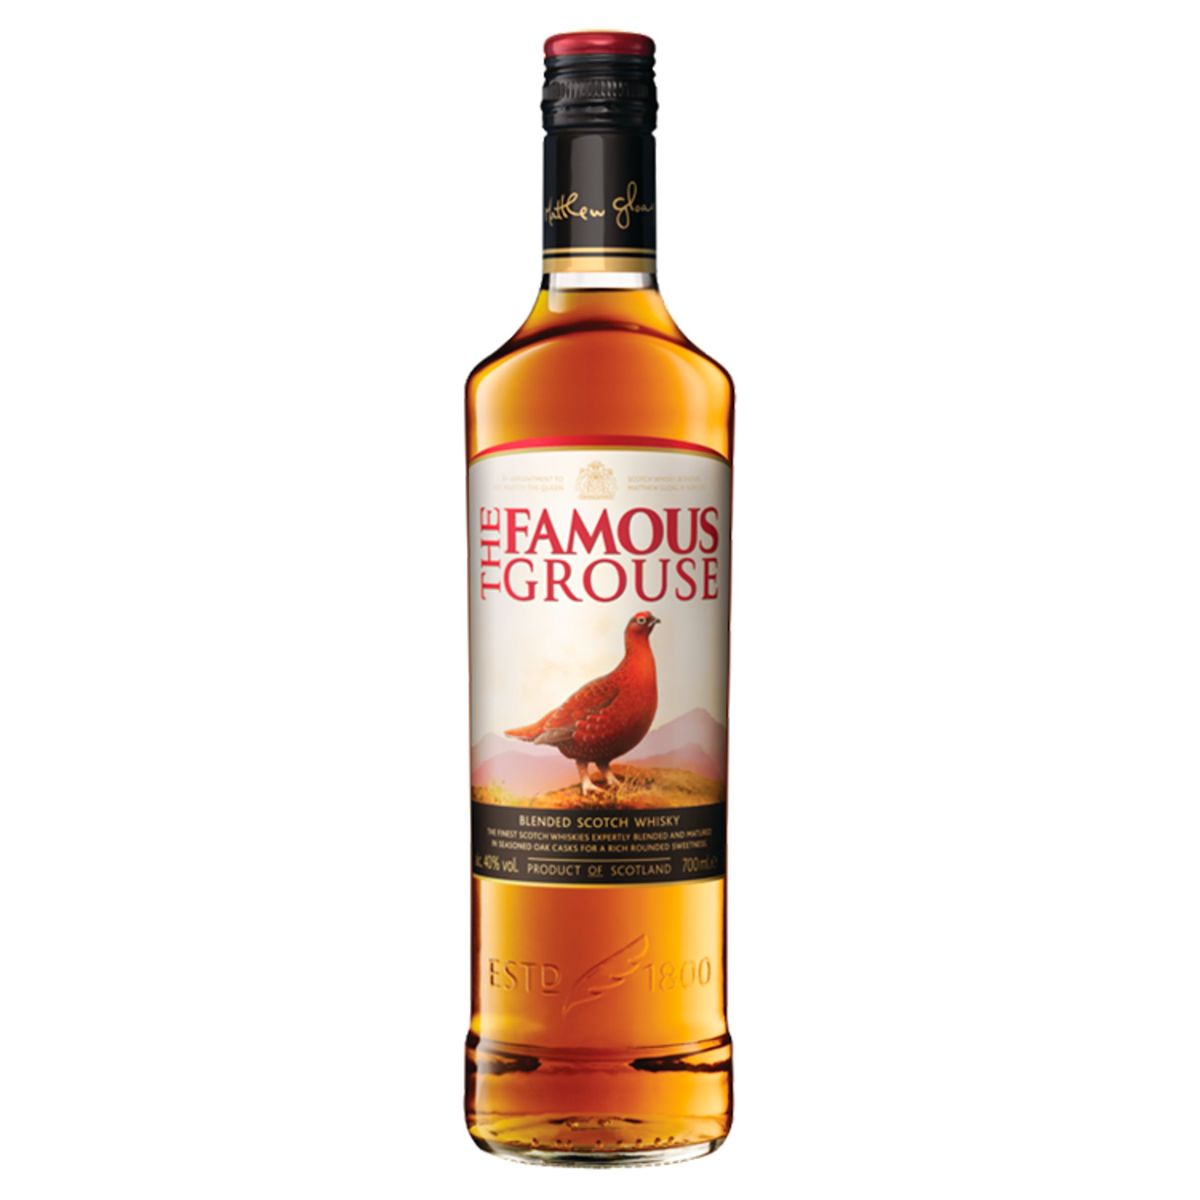 The Famous Grouse Blended Scotch Whisky 700 ml